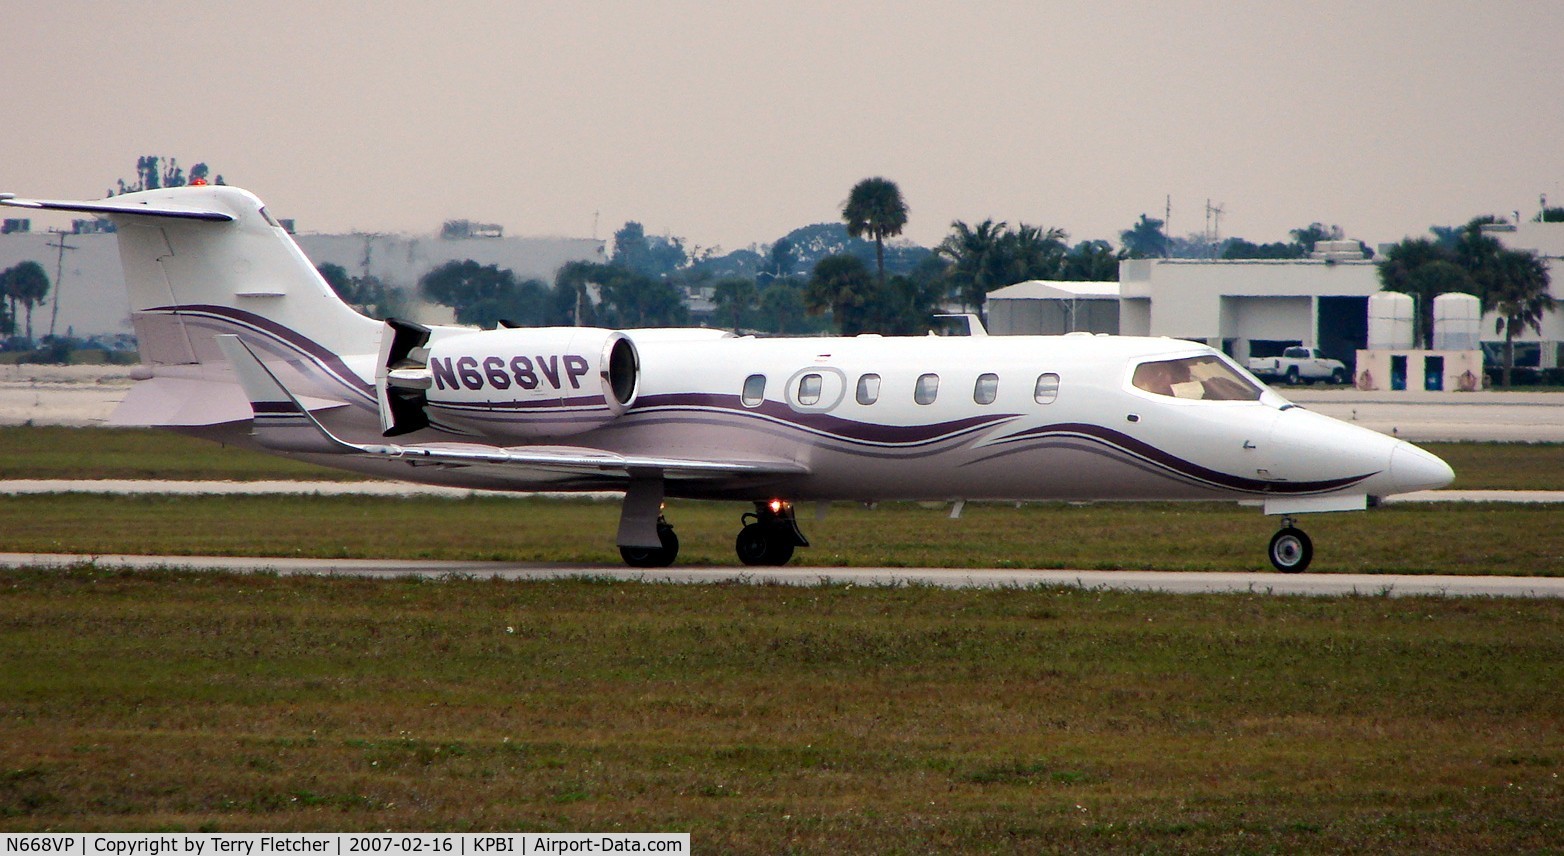 N668VP, 2001 Learjet Inc 31A C/N 31-232, part of the Friday afternoon arrivals 'rush' at PBI